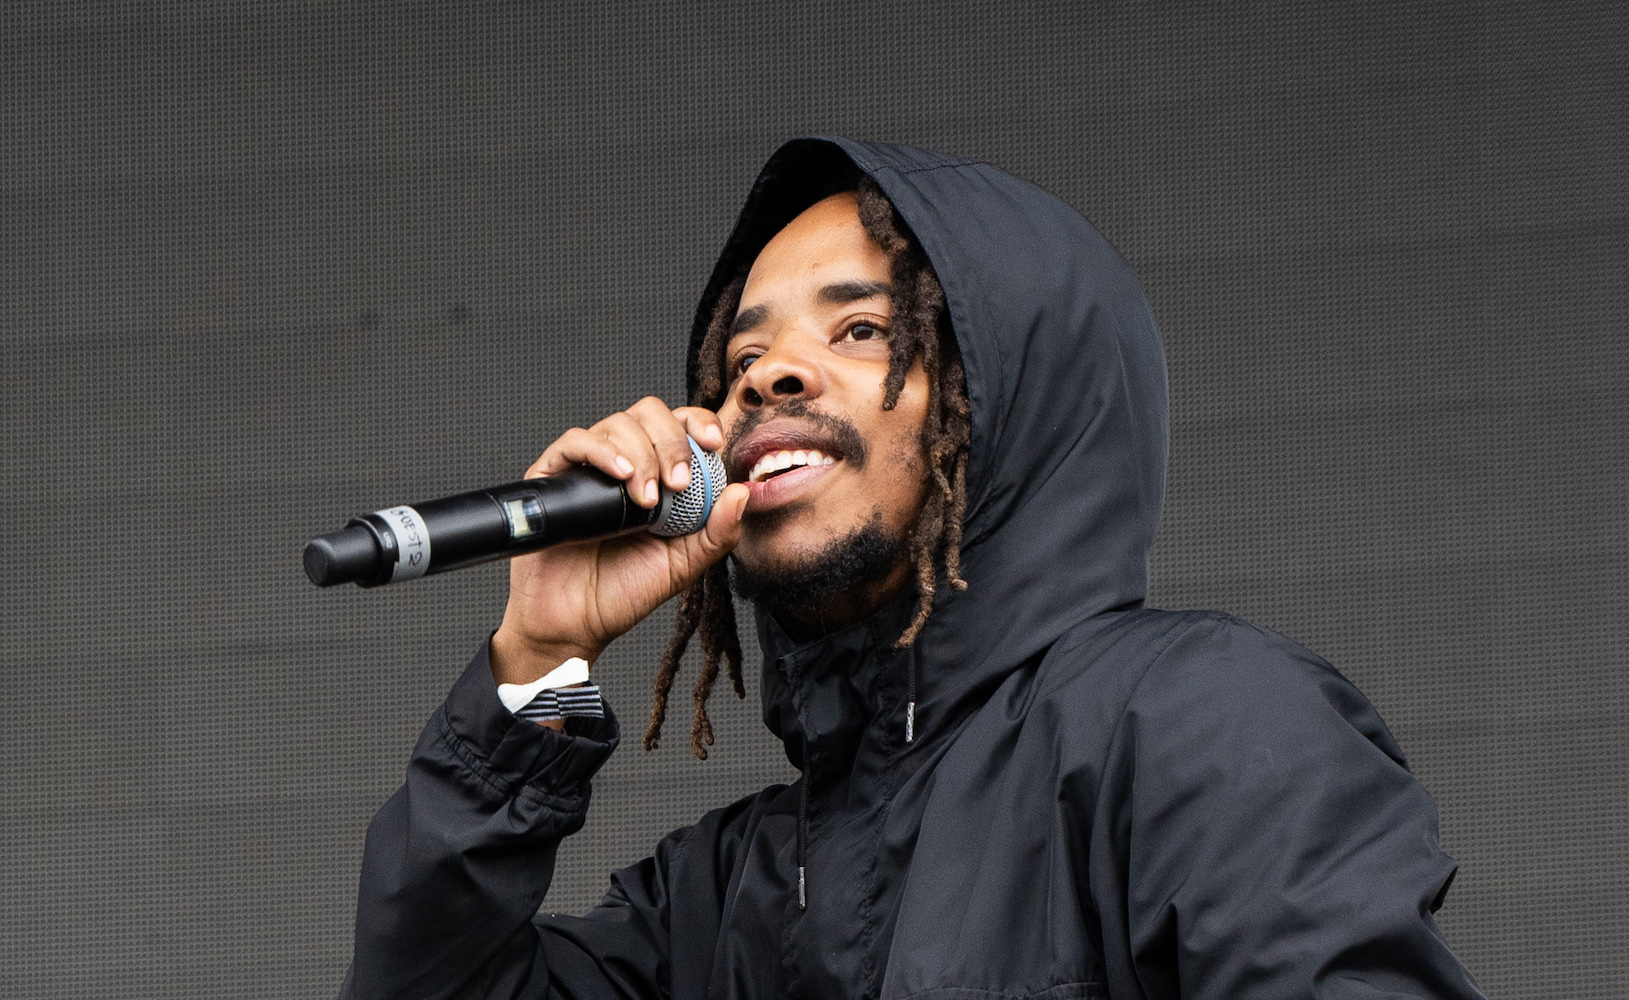 LONDON, ENGLAND - JUNE 07: Earl Sweatshirt performs onstage during Field Day Festival 2019 at Meridian Water on June 07, 2019 in London, England. (Photo by Lorne Thomson/Redferns)